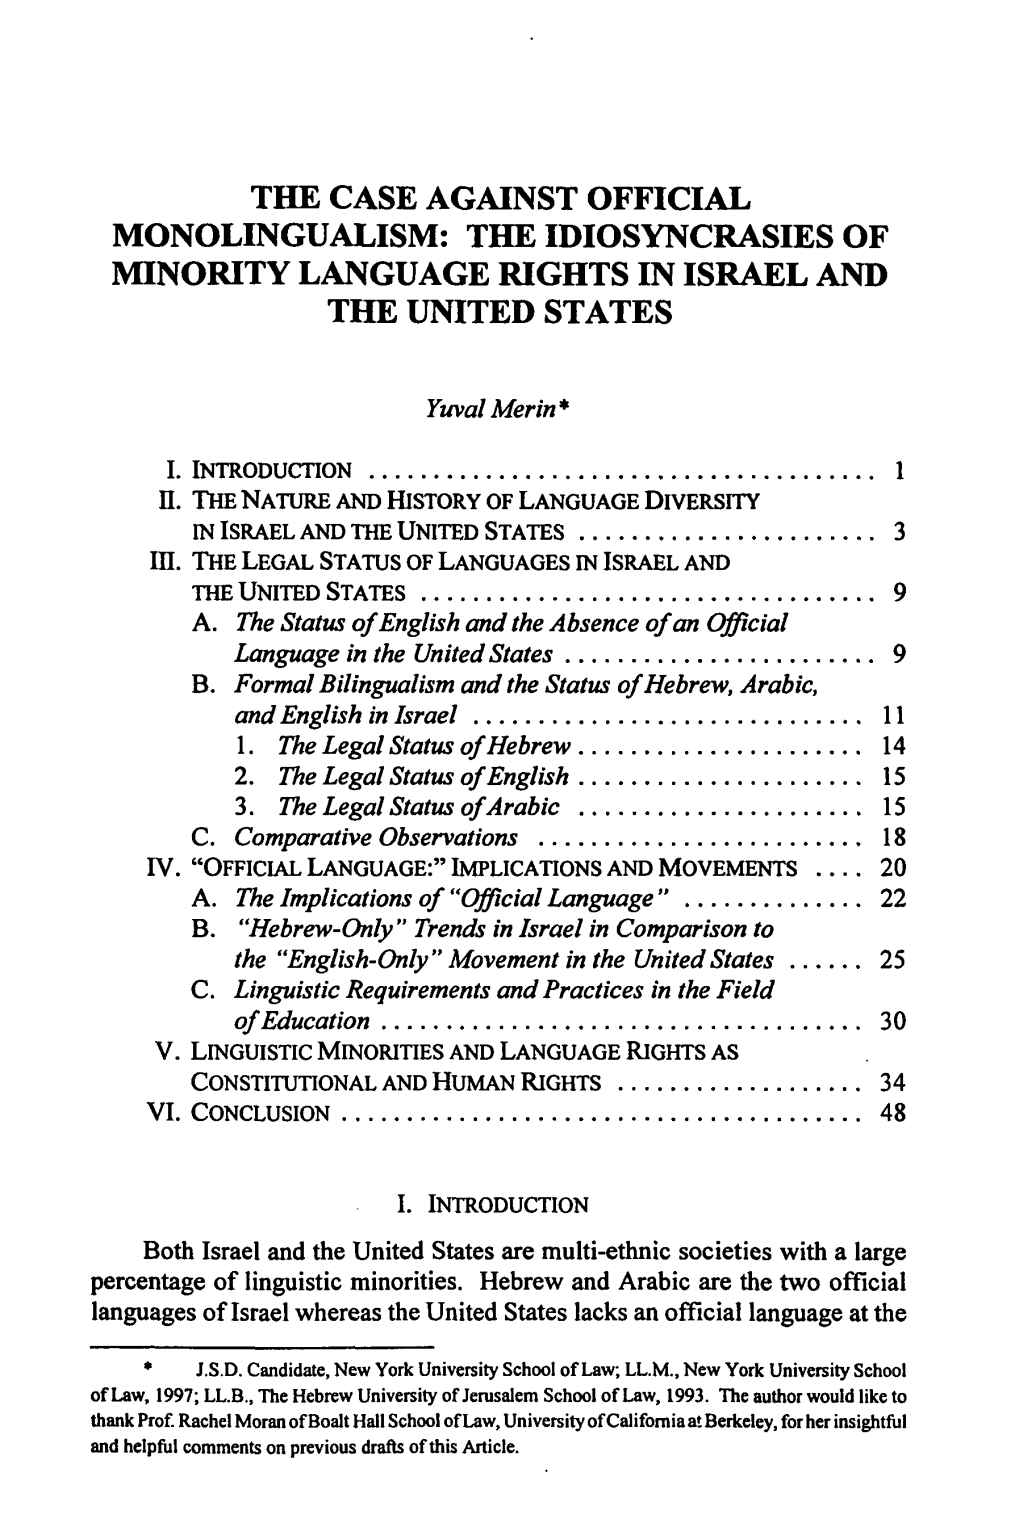 The Case Against Official Monolingualism: the Idiosyncrasies of Minority Language Rights in Israel and the United States